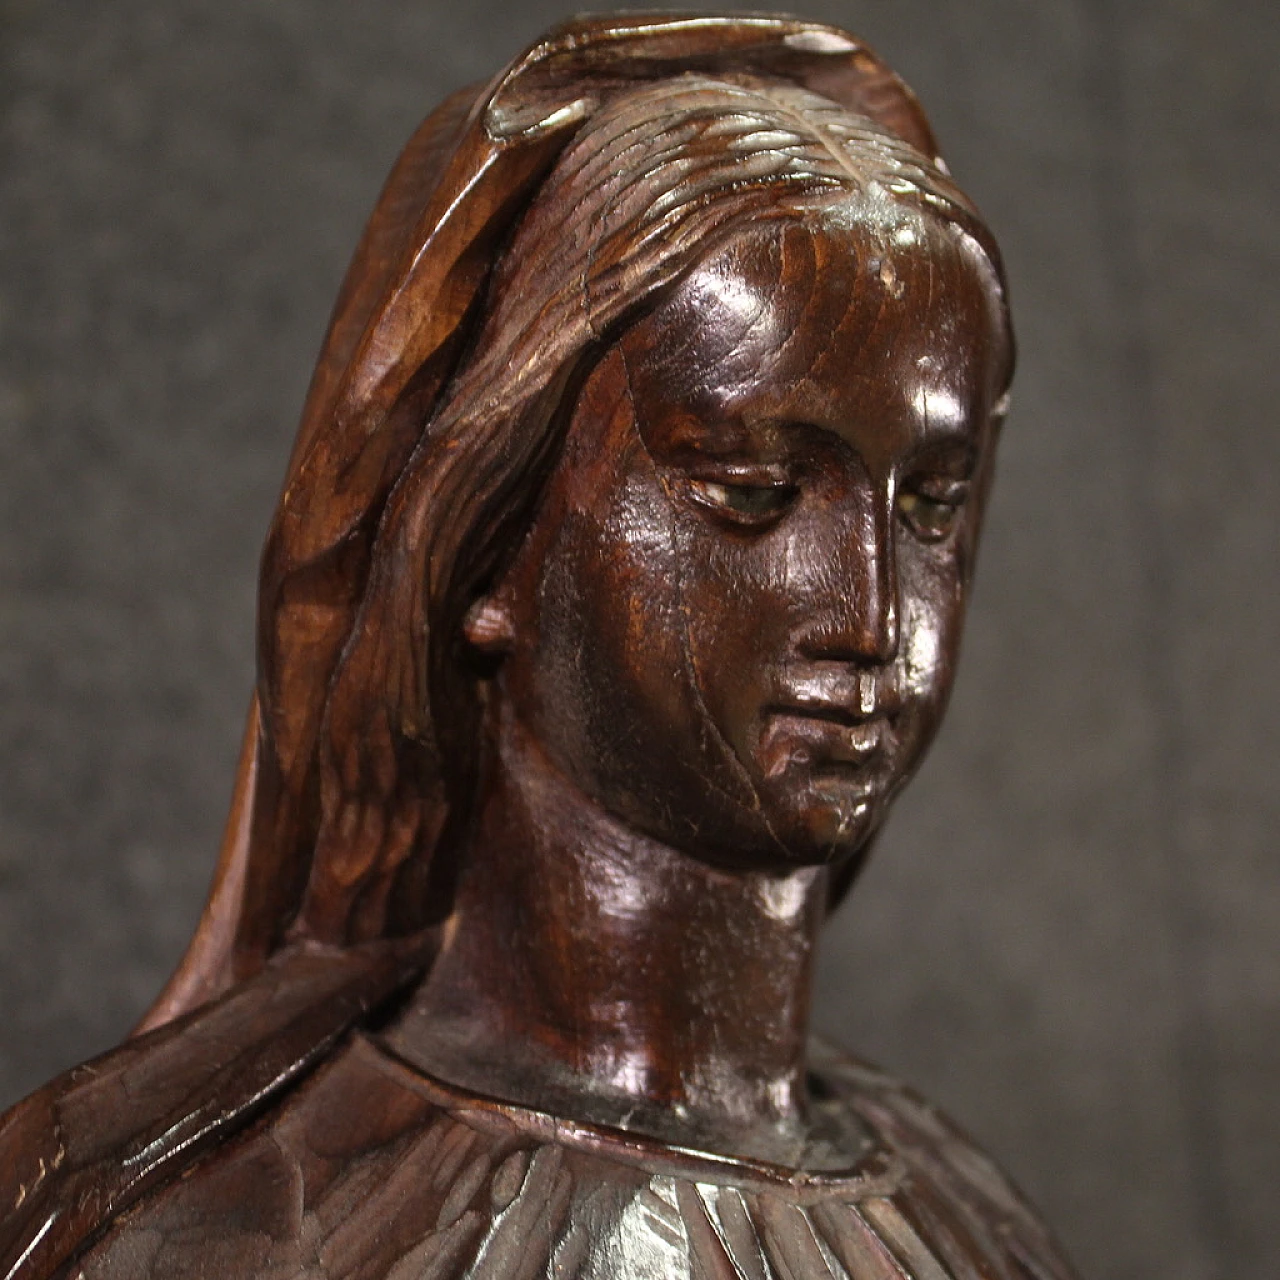 Madonna, mahogany-stained pear wood sculpture, mid-19th century 12